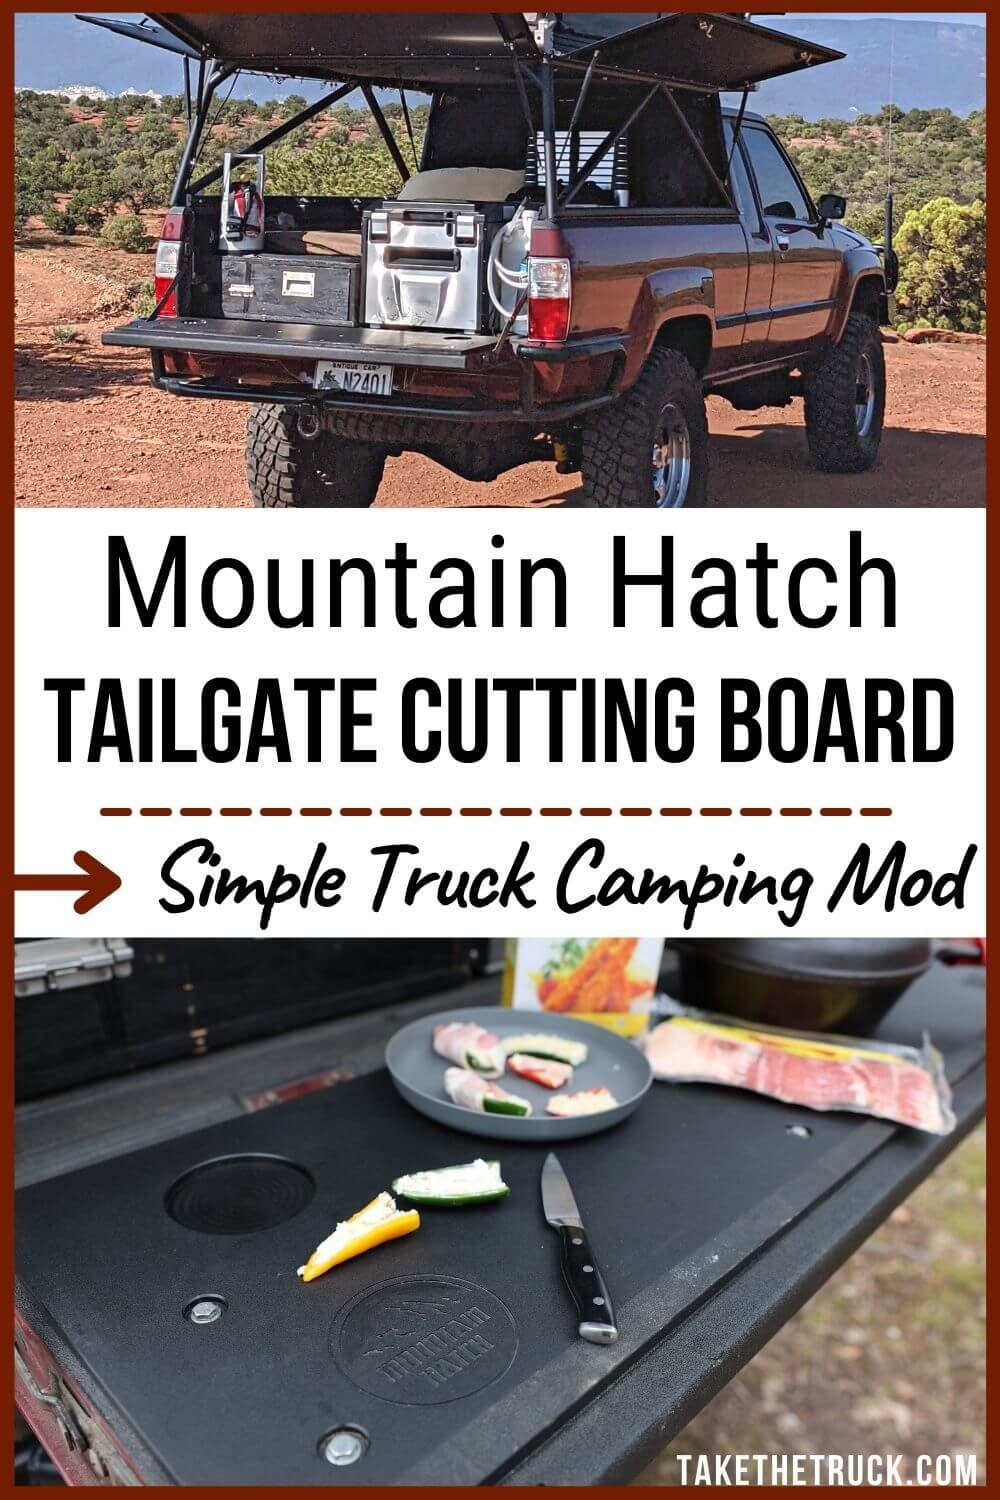 The Mountain Hatch Tailgate Cutting Board is a simple truck bed camping mod. Read about the Mountain Hatch Tailgate Panel as great truck camping accessories.